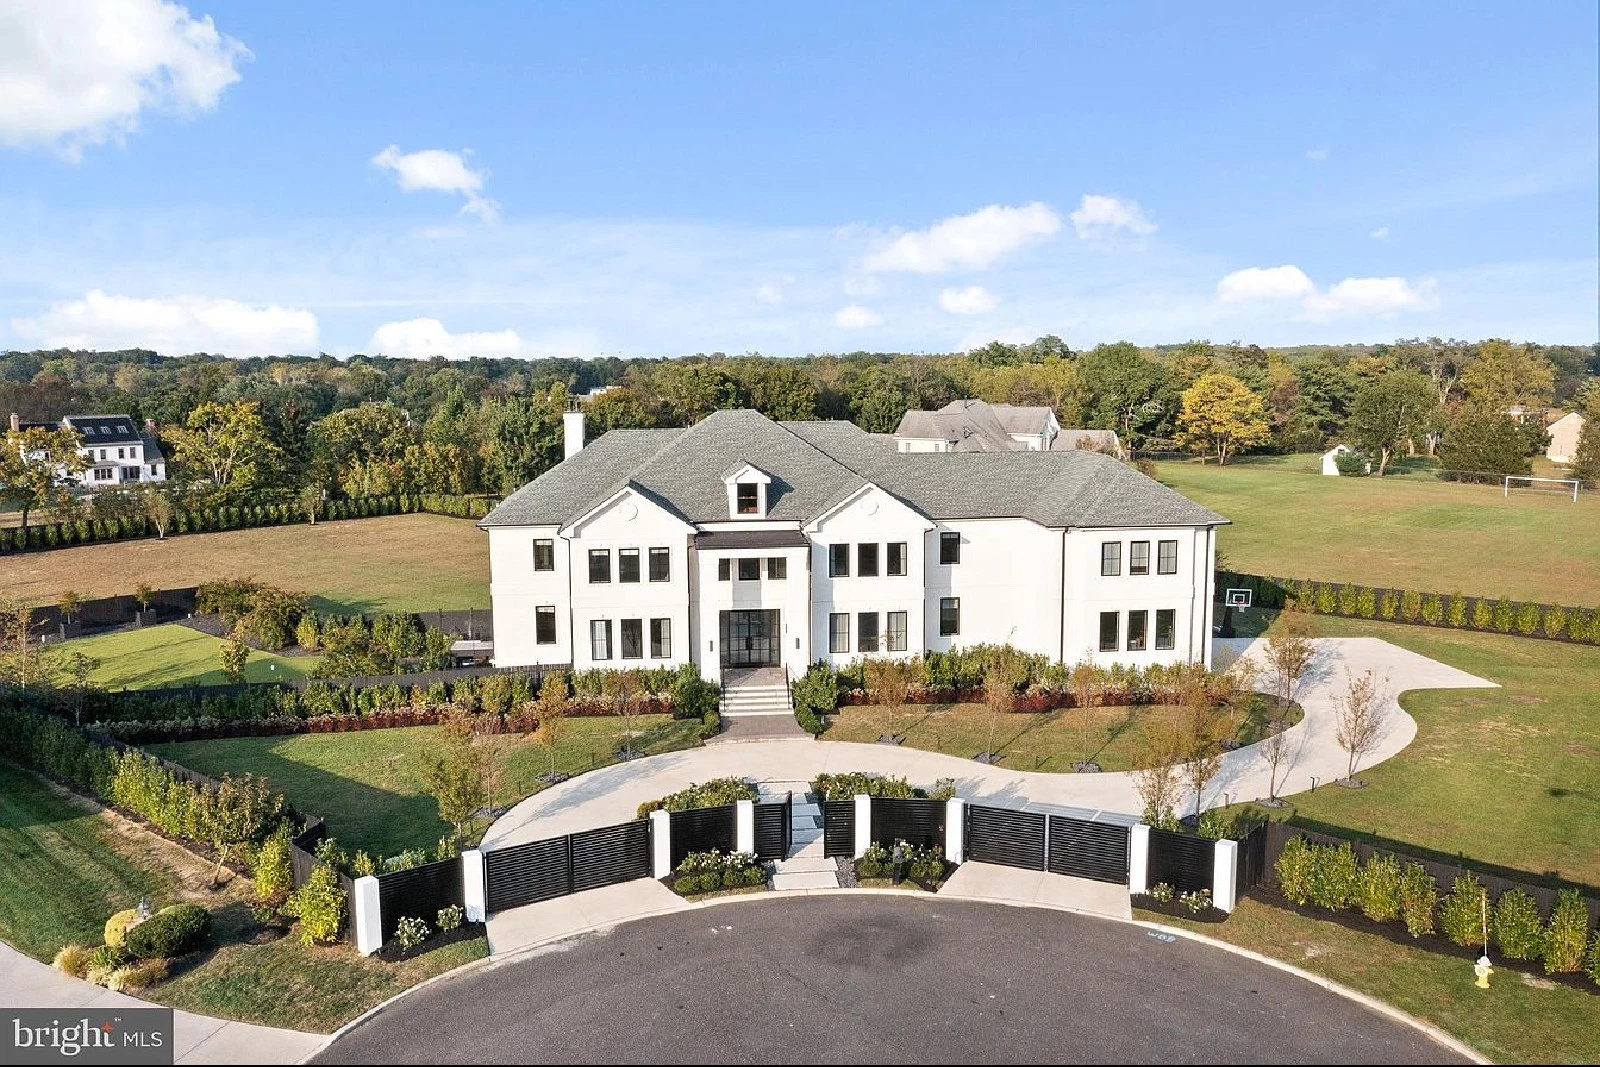 Lmao Castellanos bought Ben Simmons' house in South Jersey : r/phillies